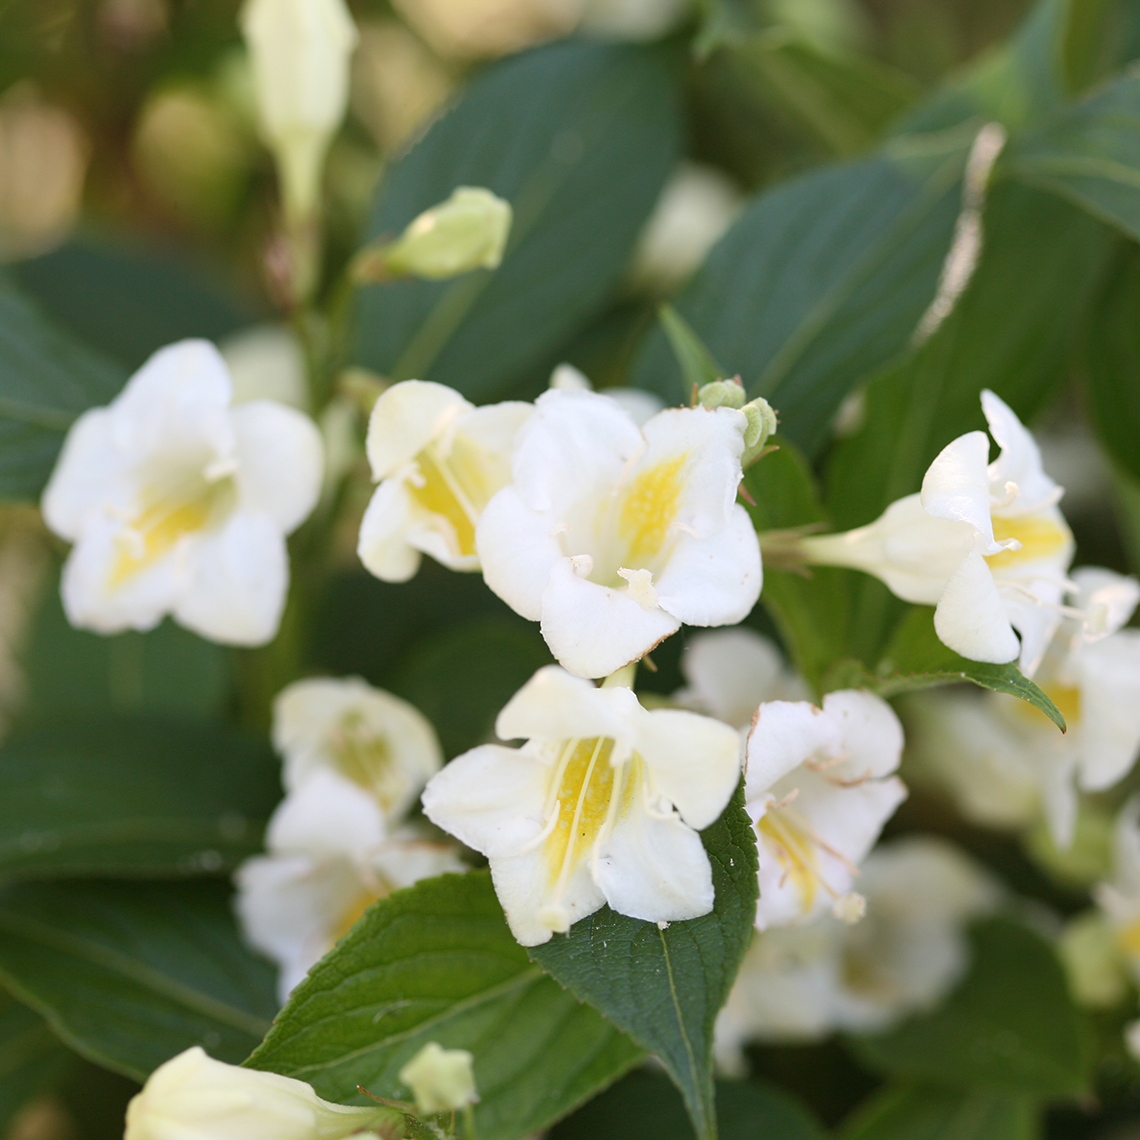 Close up of the white flowers of Czechmark Sunny Side Up weigela each with a yellow center reminiscent of an egg